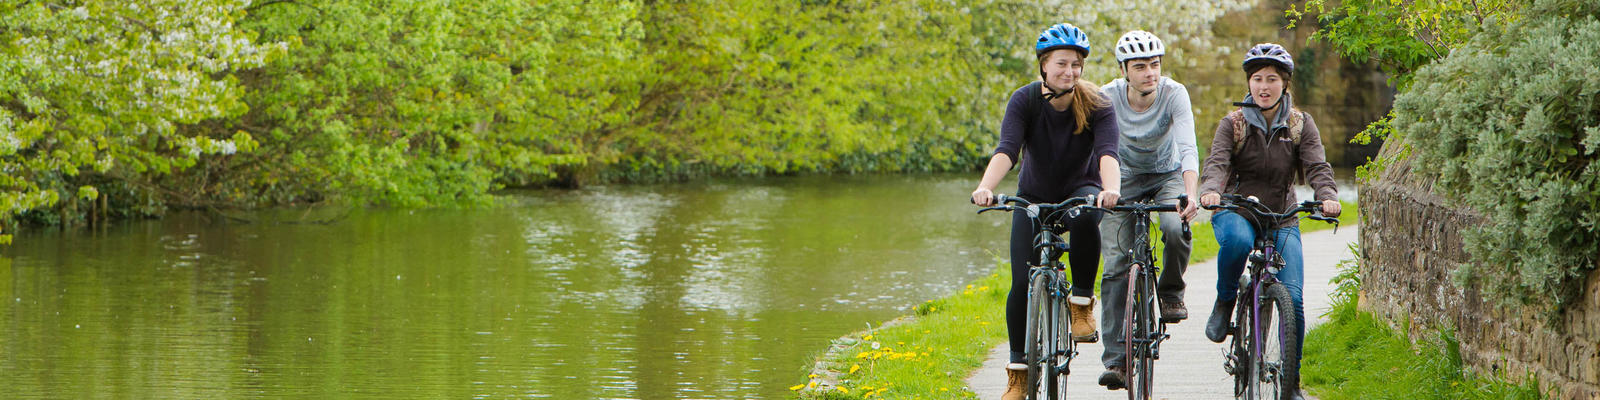 Cyclist riding along the canal